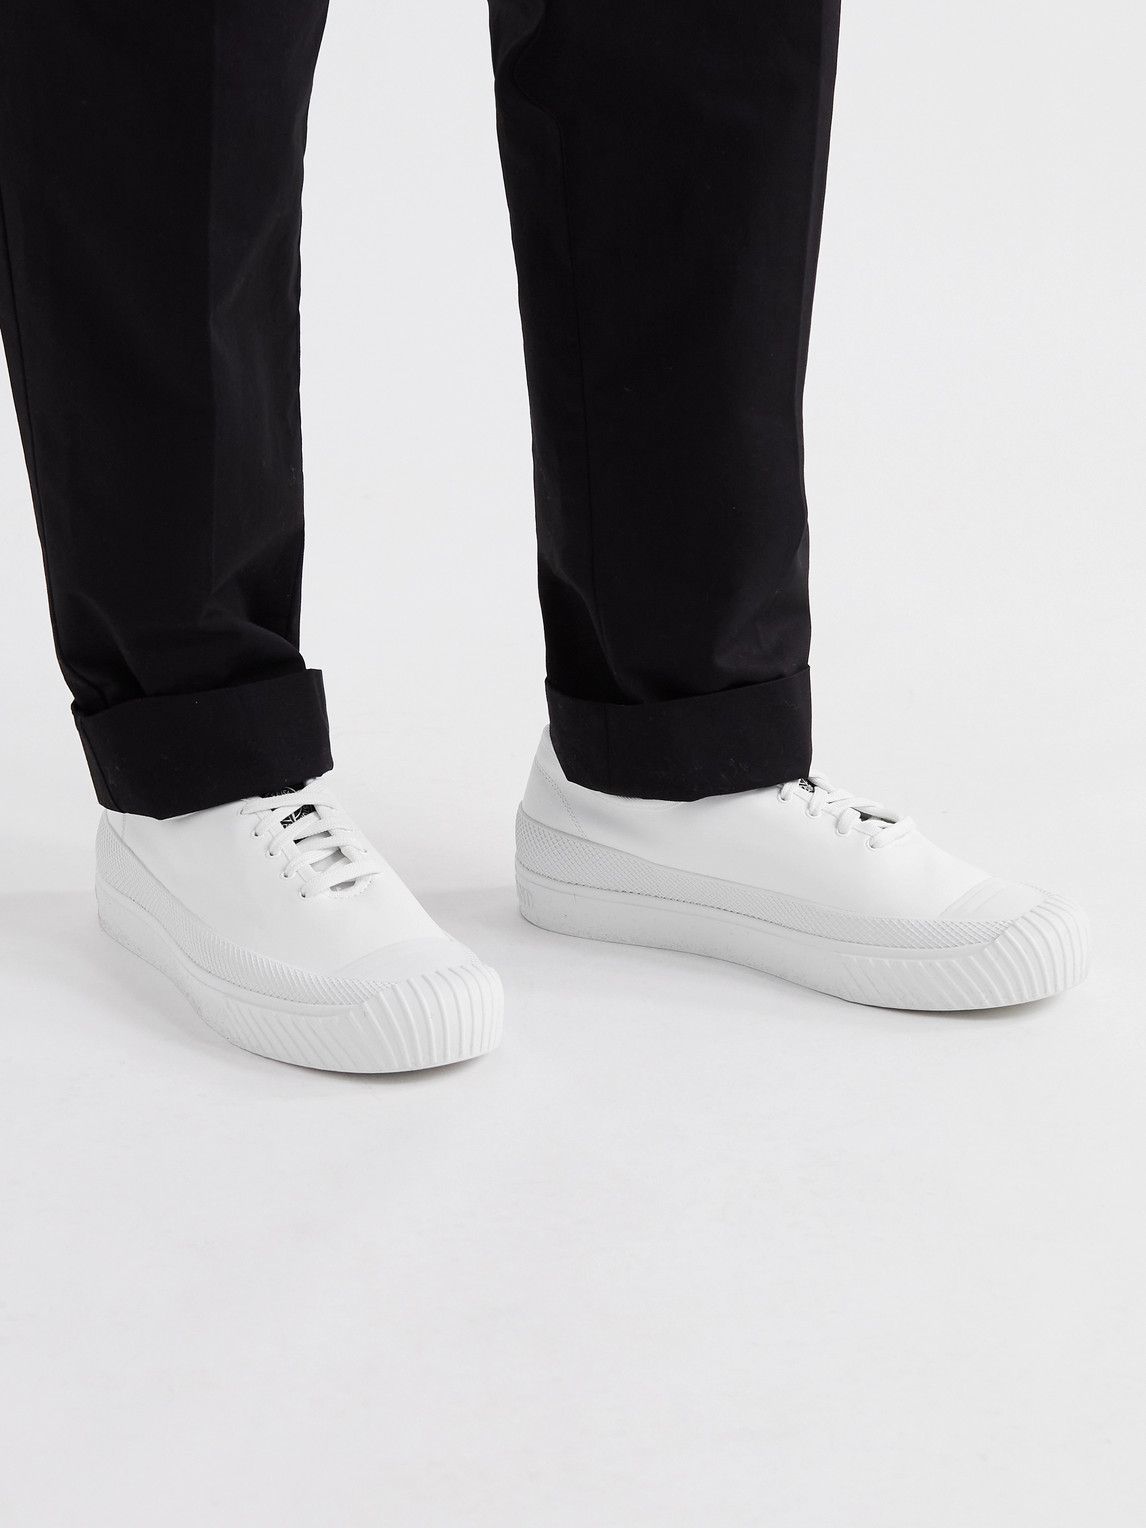 Stone Island - Rubber-Trimmed Leather Sneakers - White Stone Island